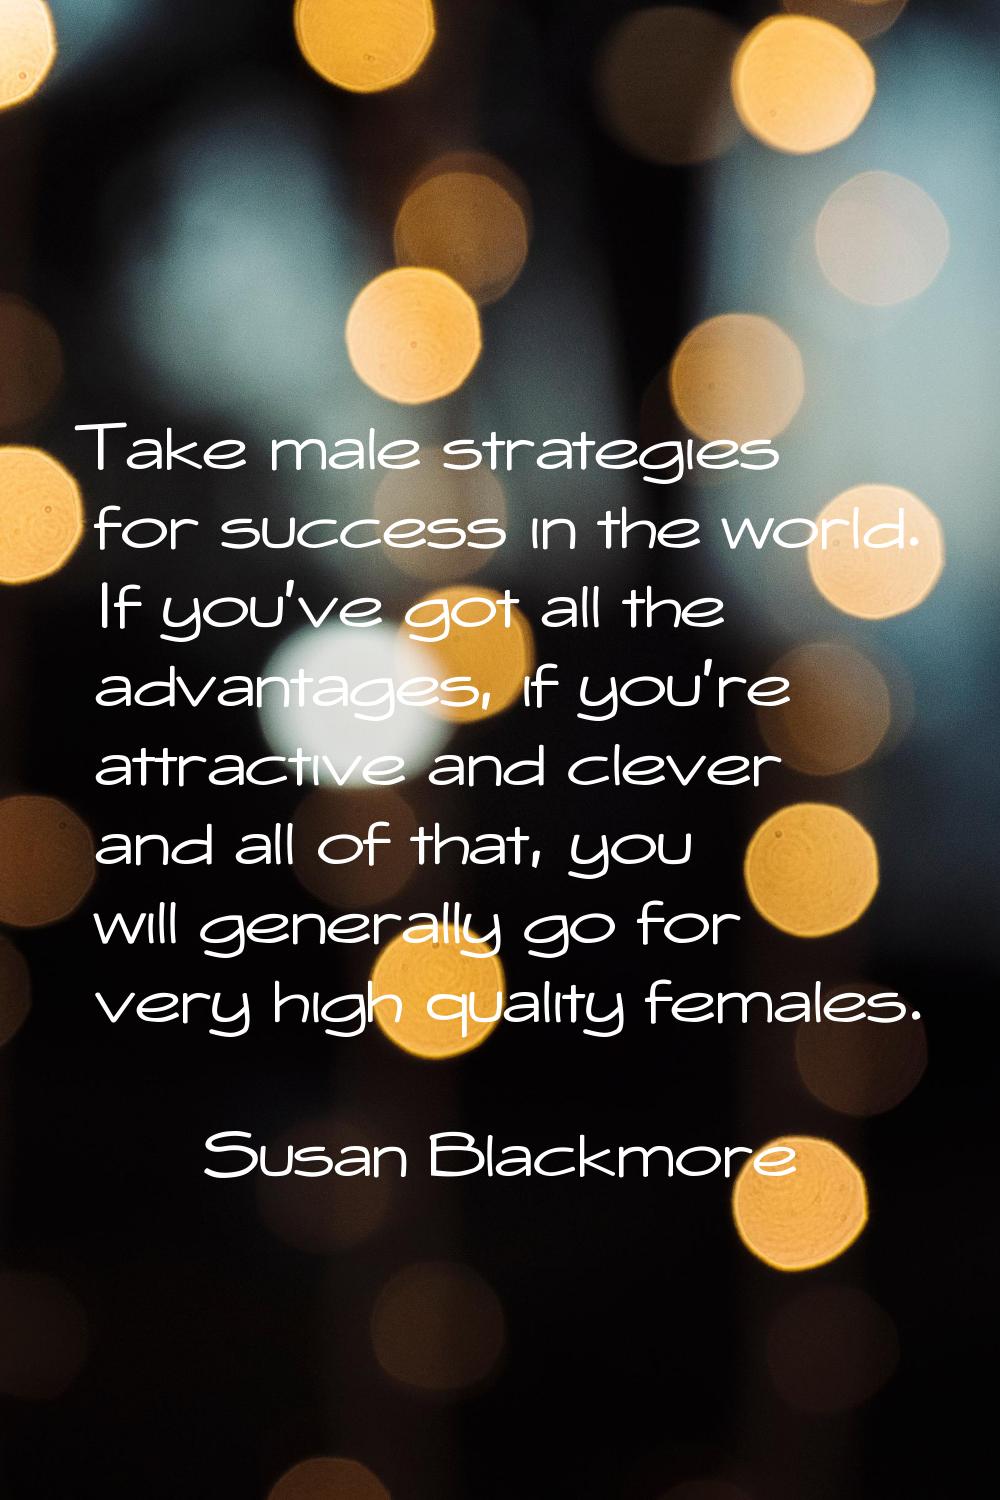 Take male strategies for success in the world. If you've got all the advantages, if you're attracti